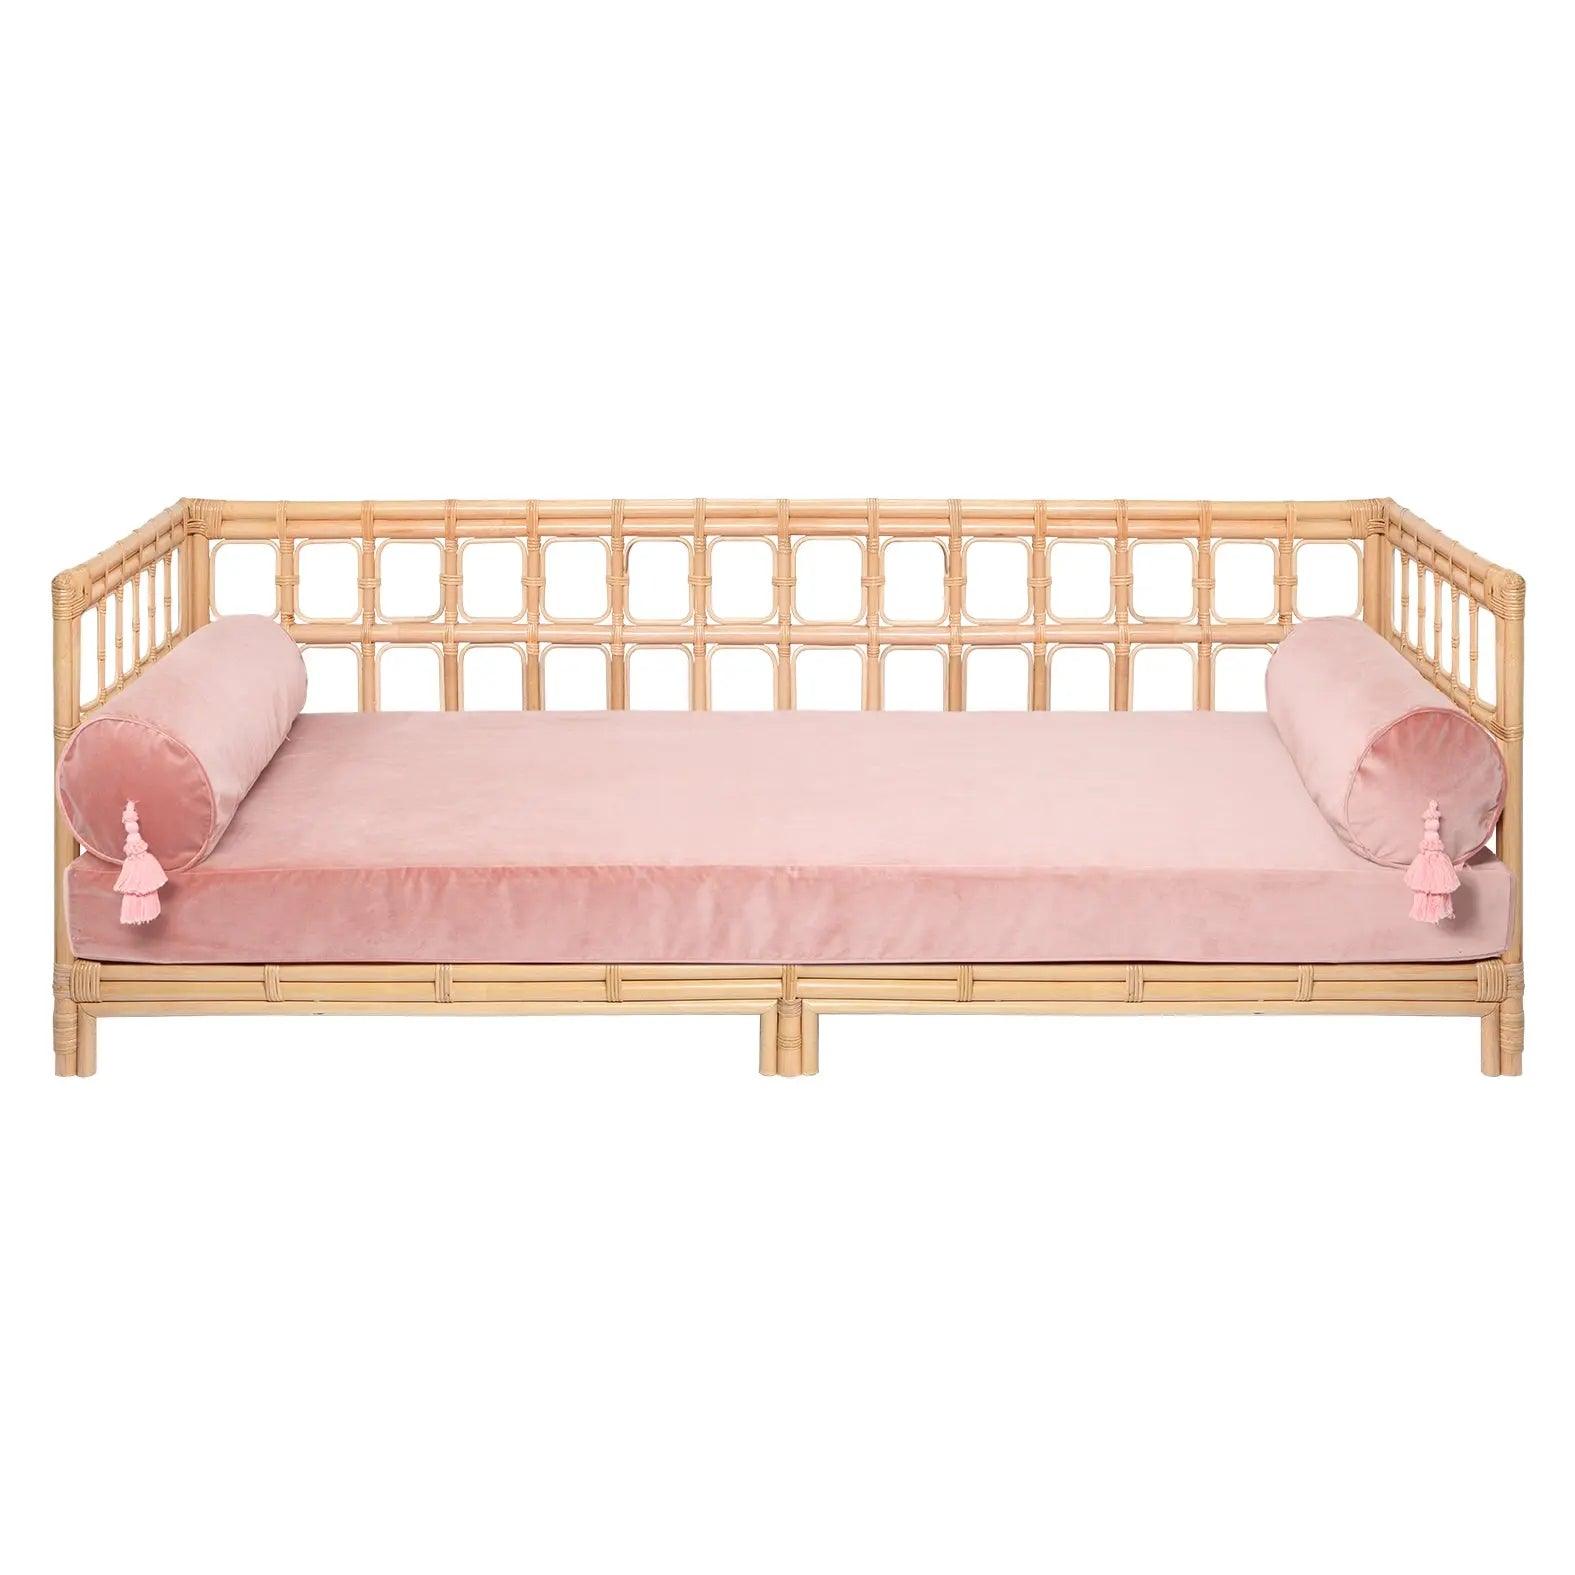 Carrington 3 Seater Day Bed, Natural The Family Love Tree